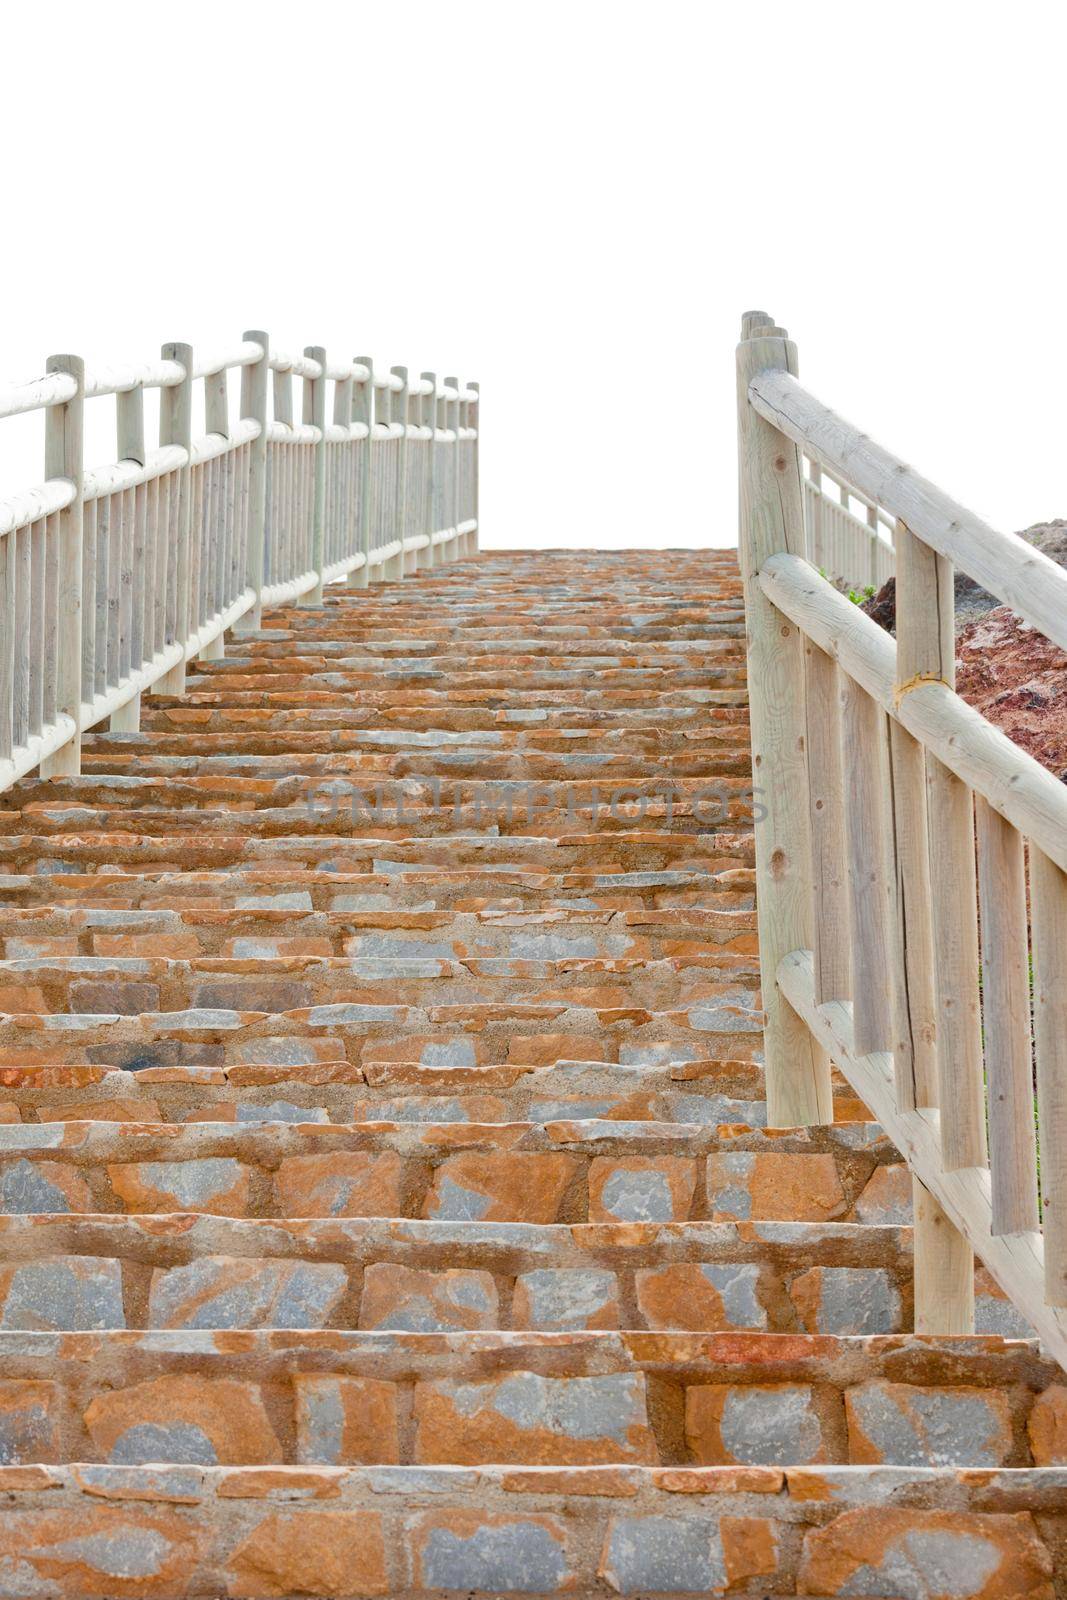 Flight of brick steps with wooden railings by PiLens